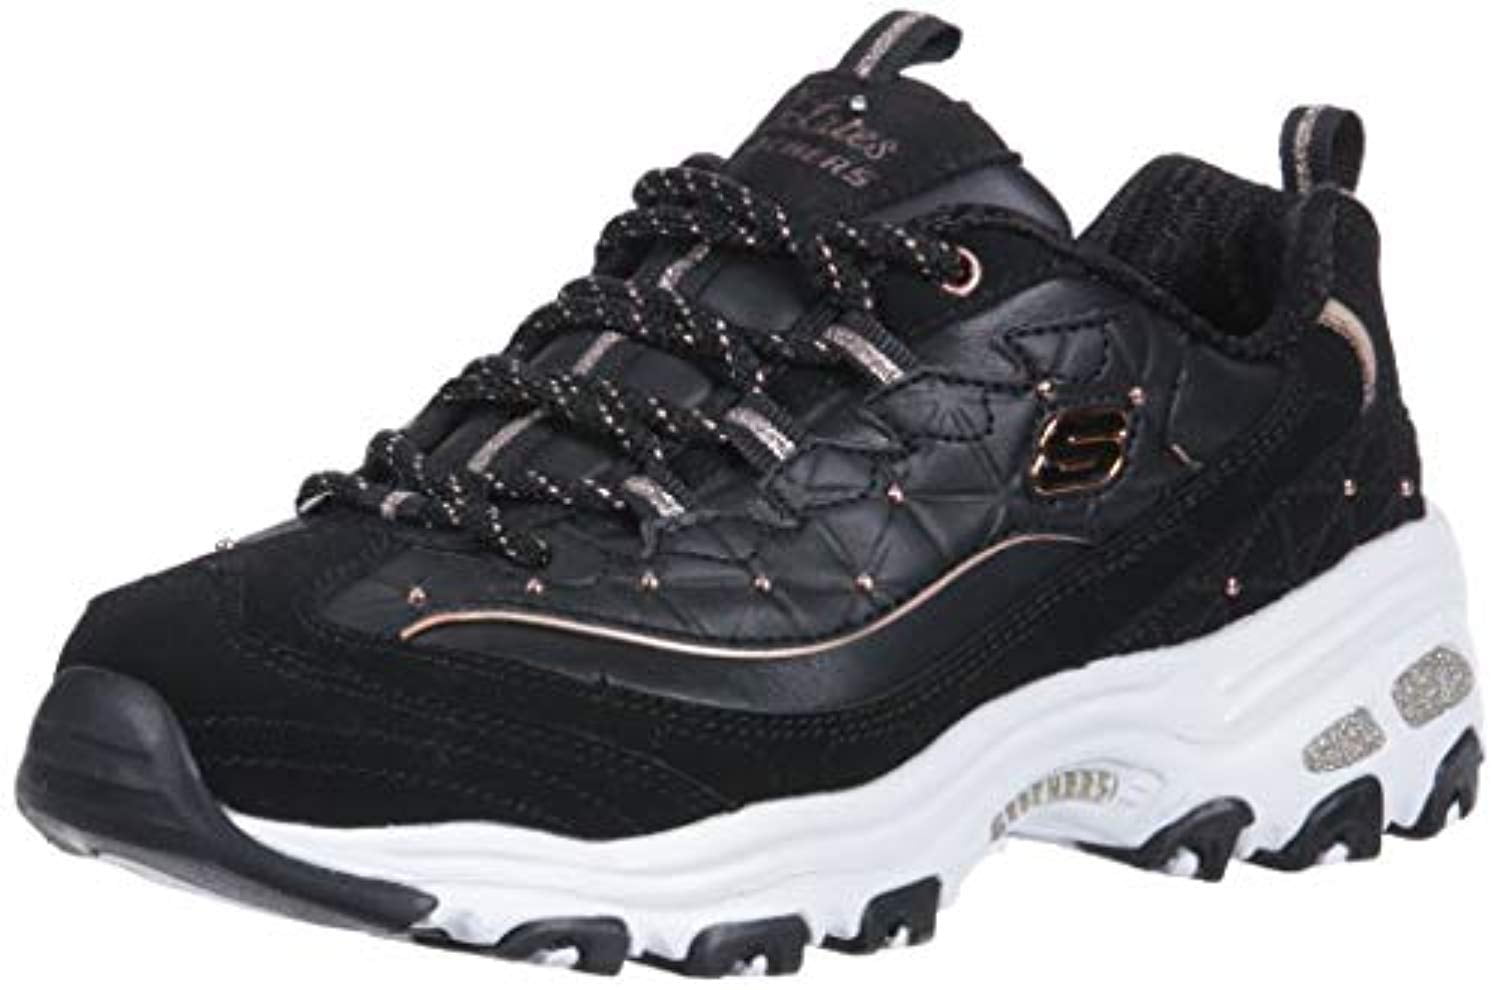 skechers black and rose gold